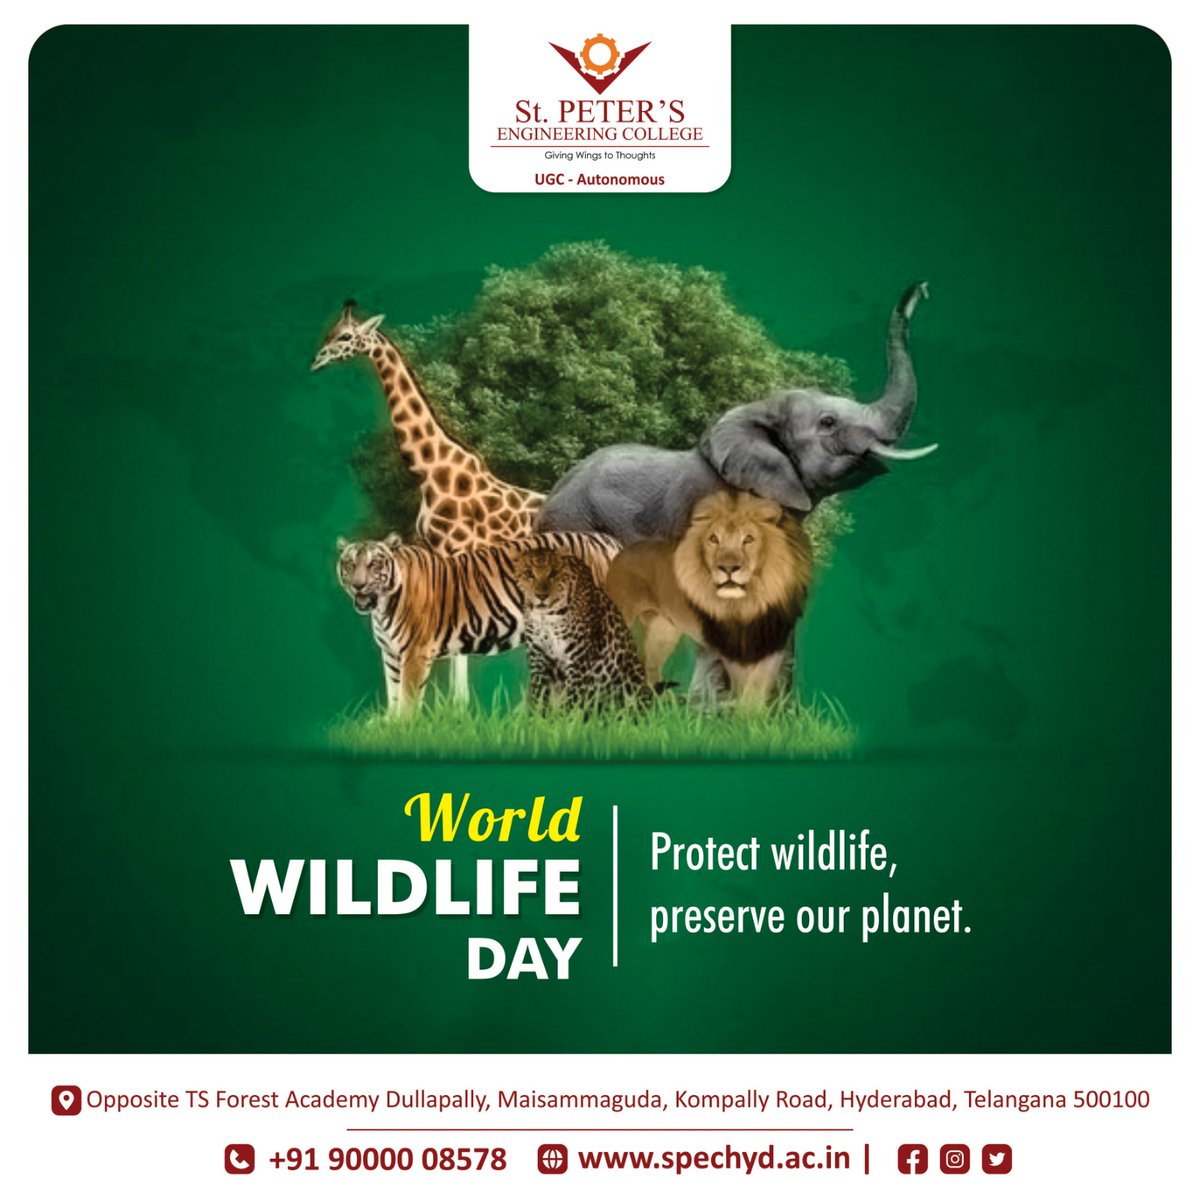 On #WorldWildlifeDay, let's recognize the importance of protecting our planet's precious wildlife. Let's make sure that future generations can experience the wonder and beauty of our planet's amazing wildlife. 

#ProtectWildlife #SustainableLiving #ConservationAction #SPEC